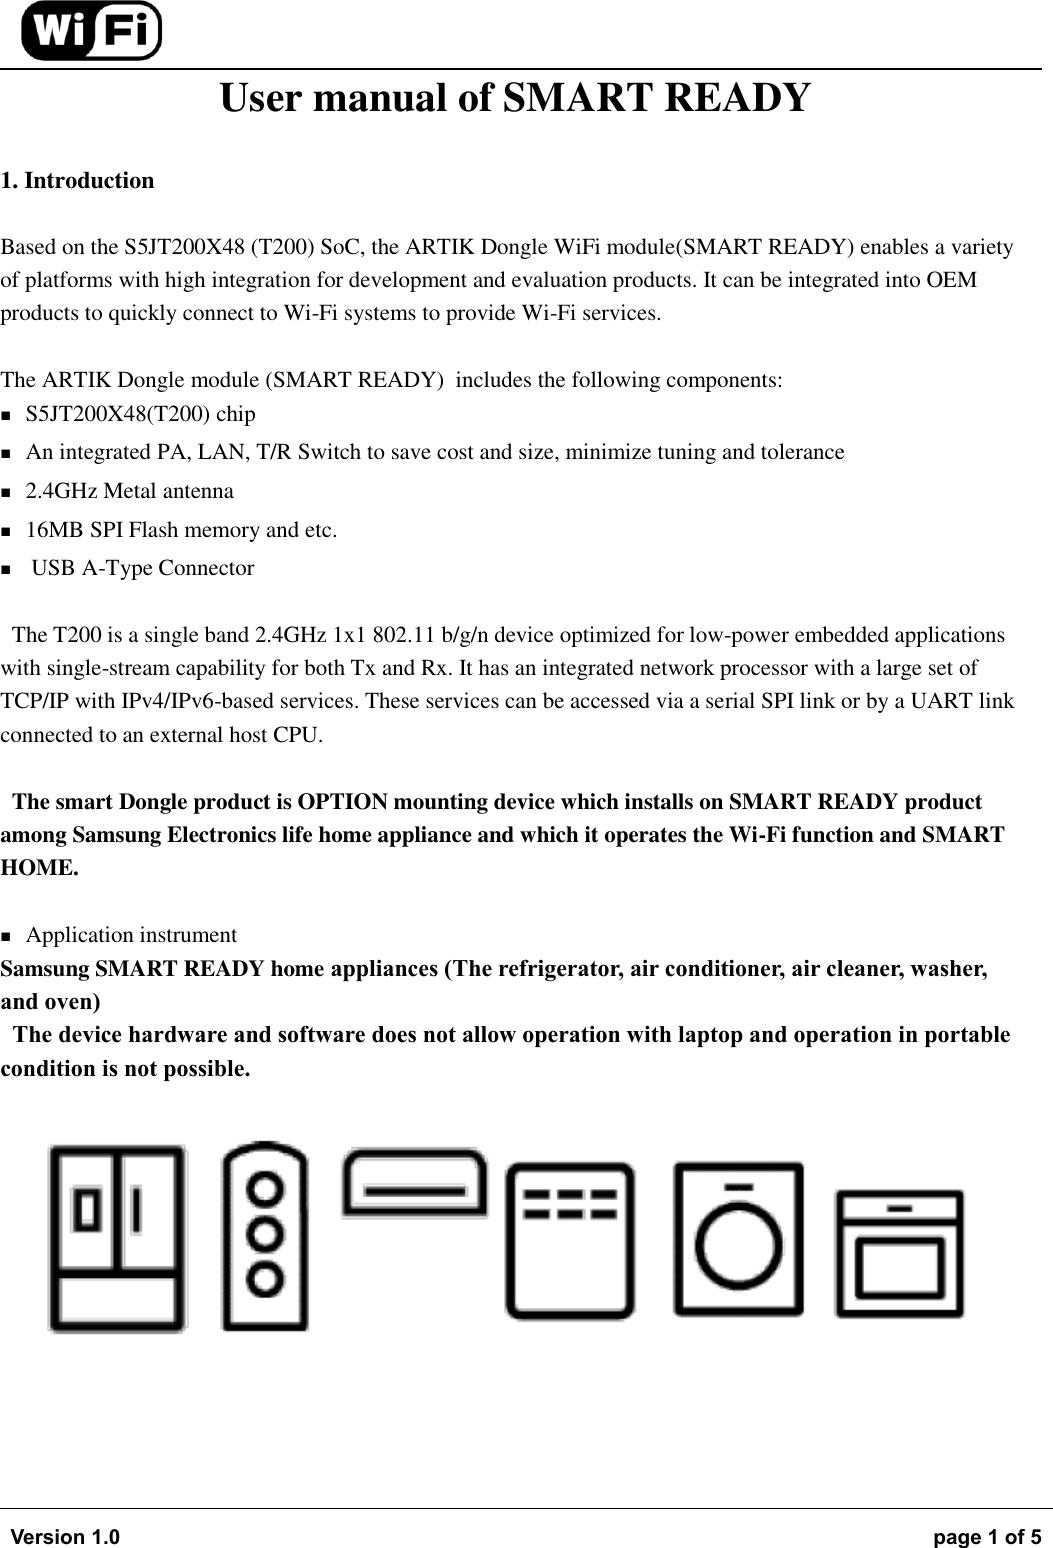 Page 1 of Samsung Electronics Co HD2018GH SMART READY User Manual 